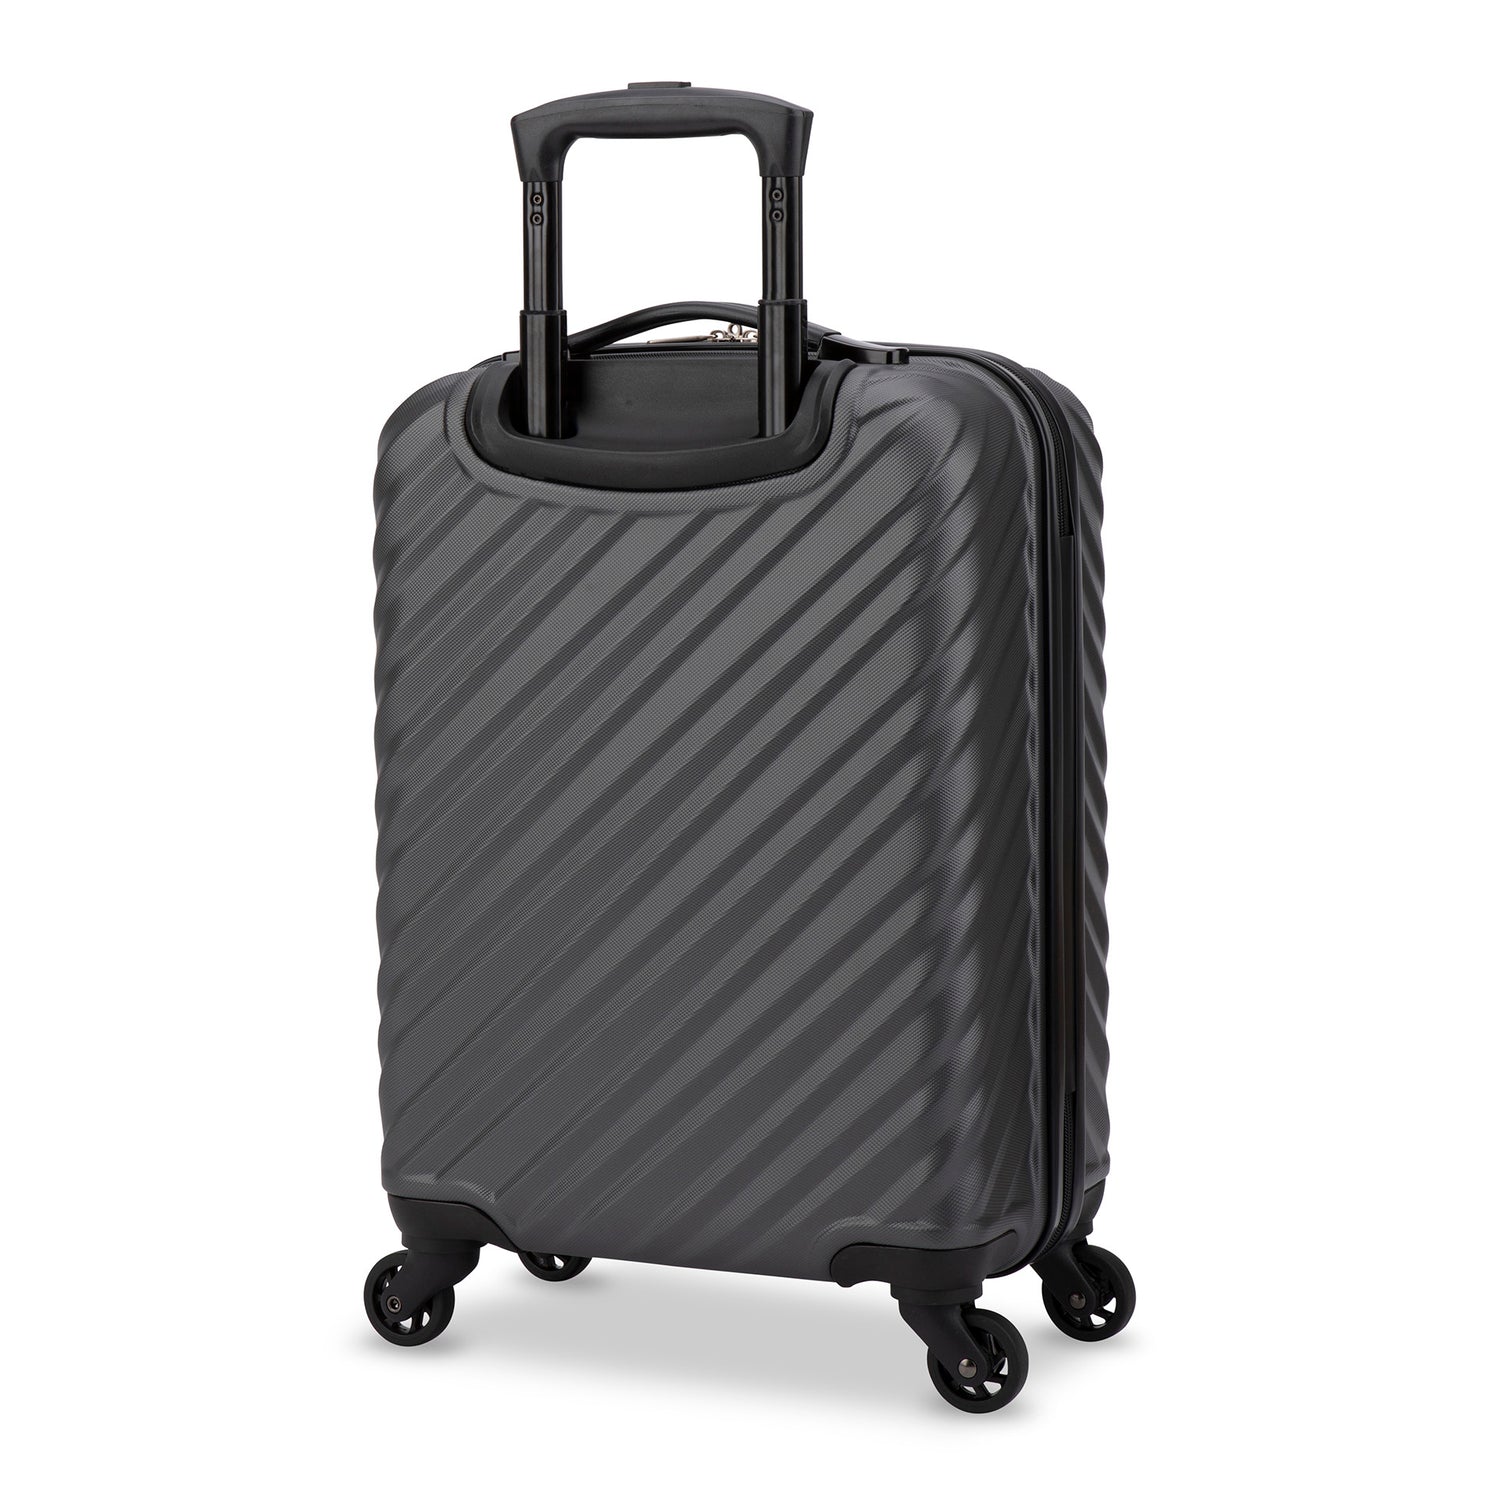 Back side view of a black hard side luggage called MOD designed by Swiss Gear sold at Bentley, showcasing its telescopic handle and resistant-absorbant texture.